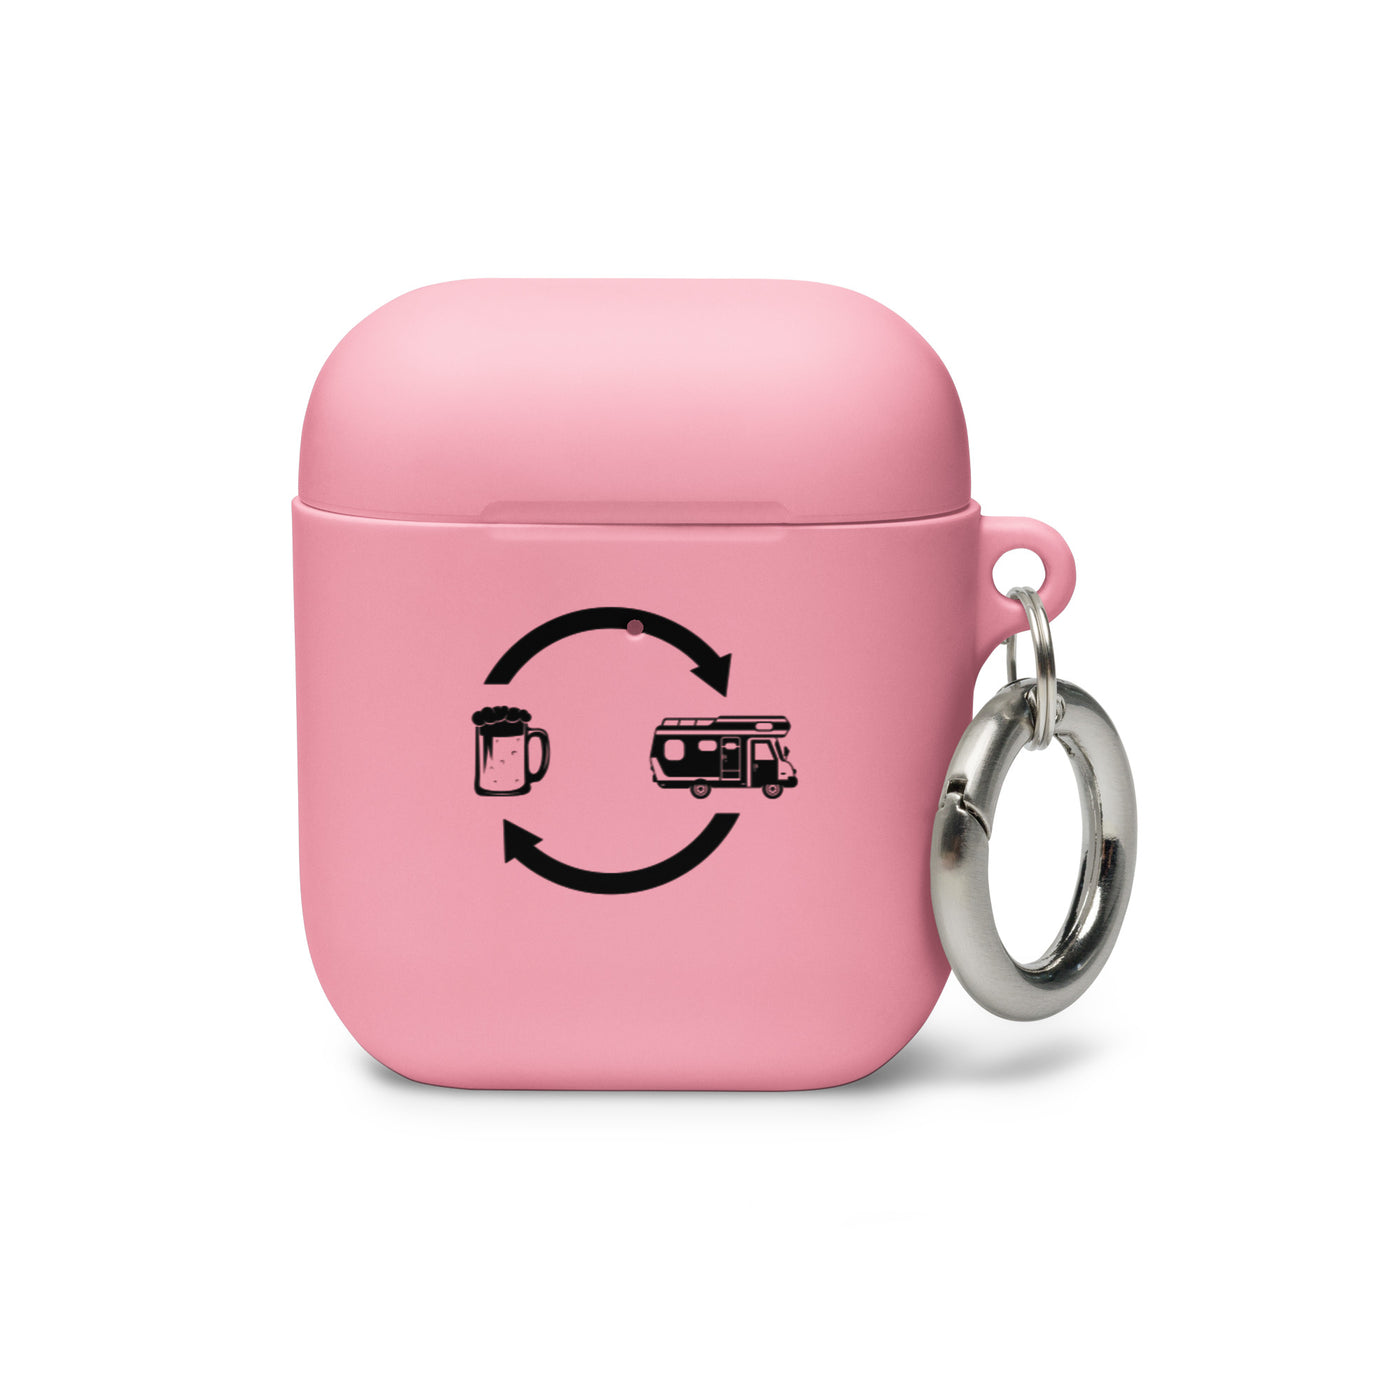 Bier, Pfeile Laden Und Camping - AirPods Case camping Pink AirPods